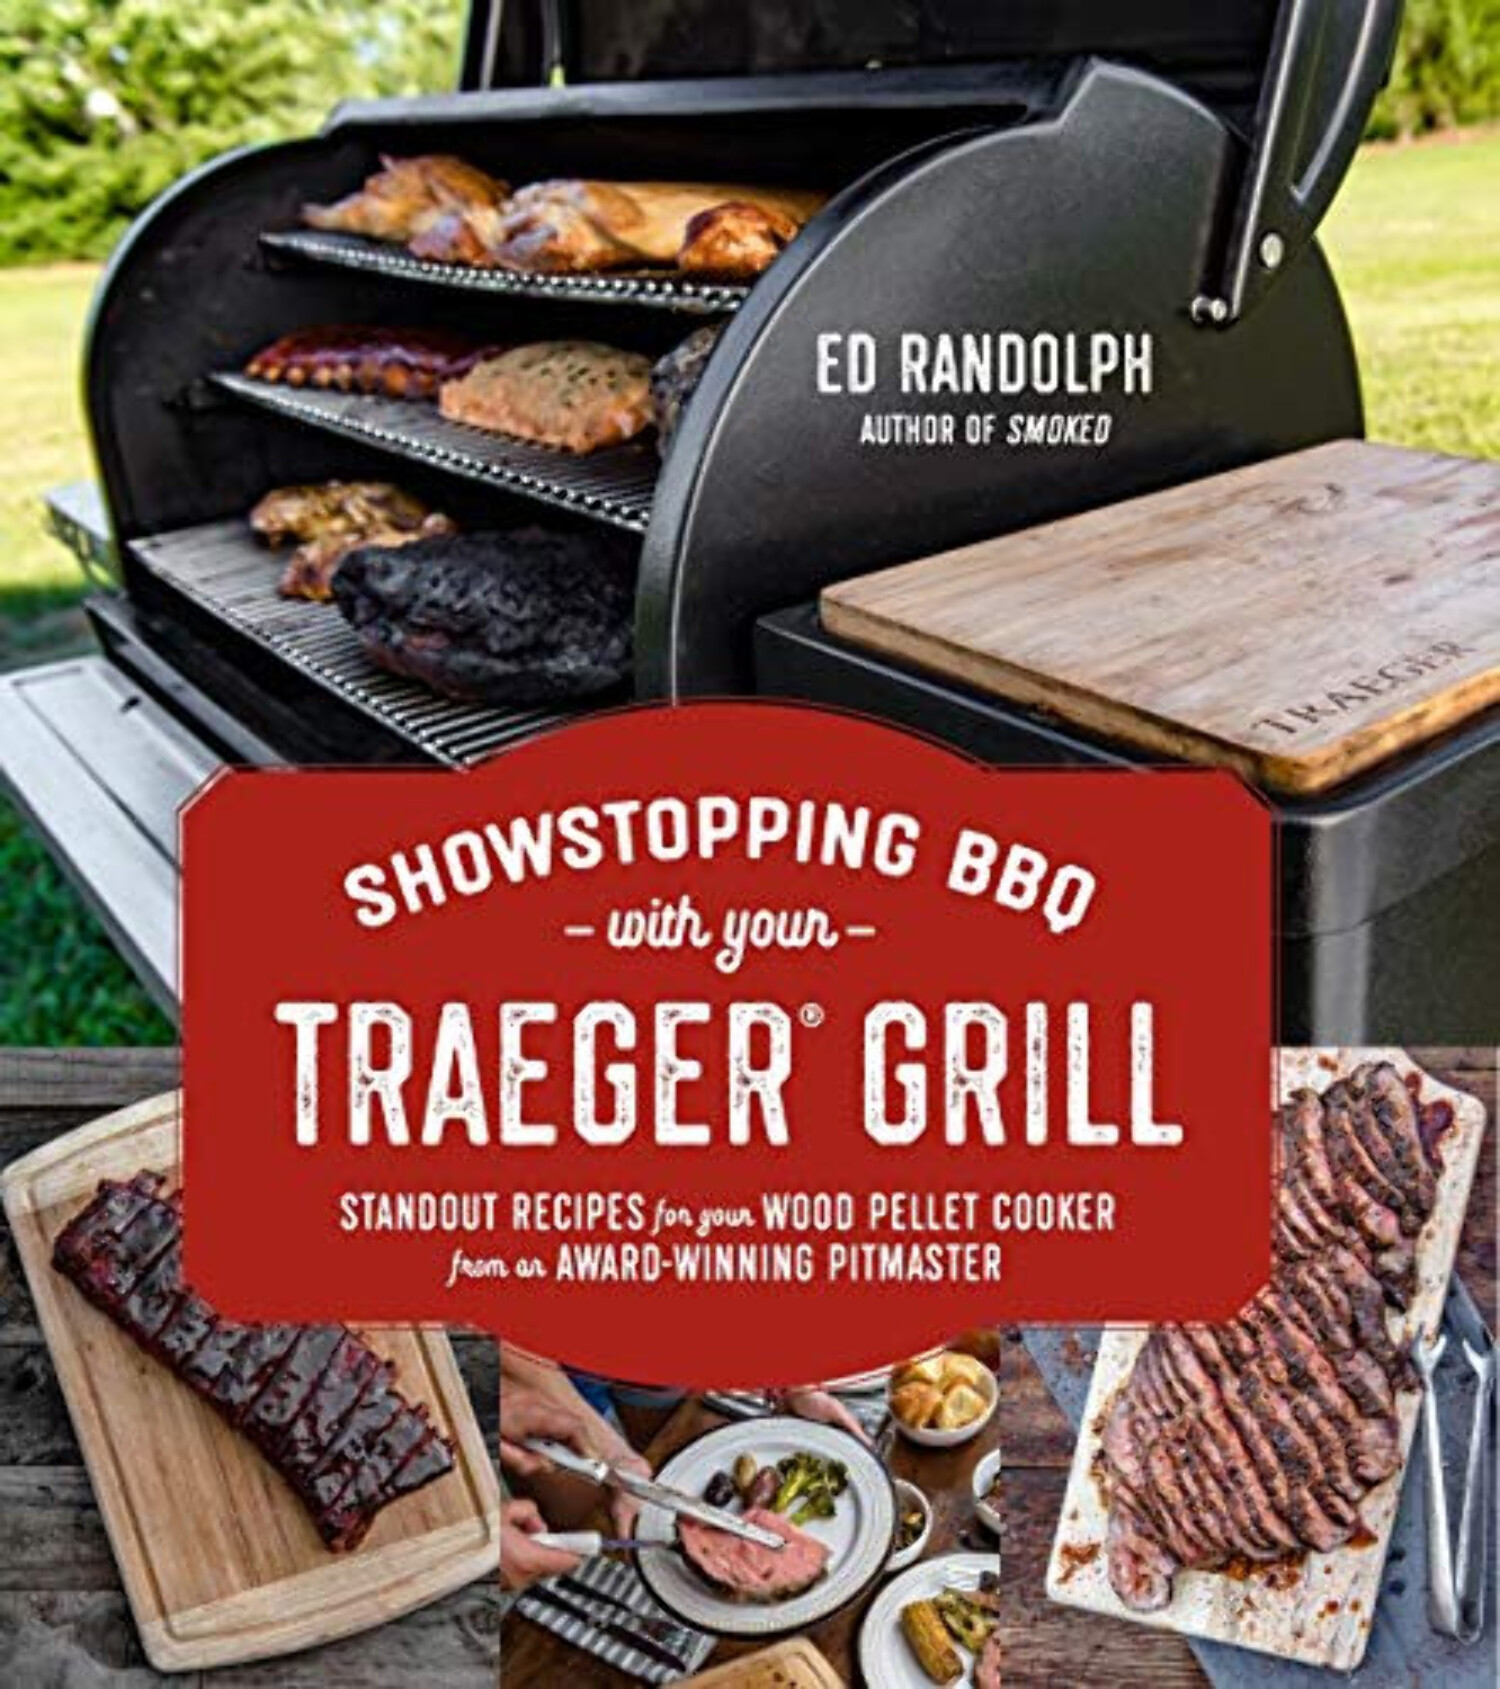 Showstopping BBQ with Your Traeger Grill: Standout Recipes for Your Wood Pellet Cooker from an Award-Winning Pitmaster - image 1 of 1